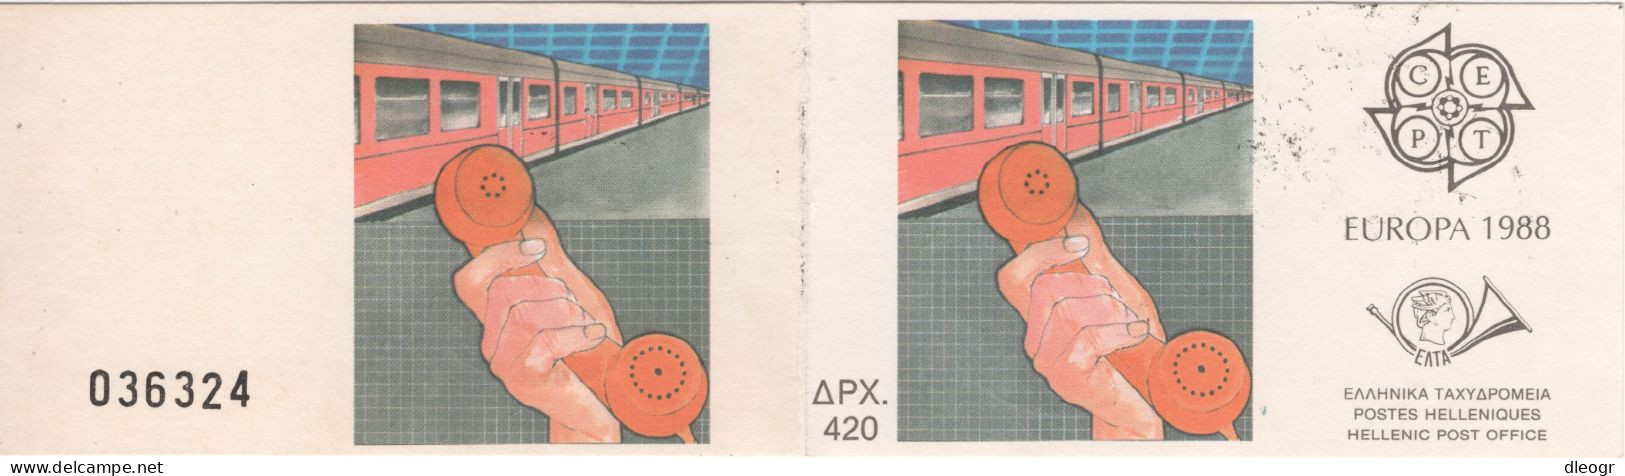 Greece 1988 Europa Cept Imperforate Booklet Used - Carnets